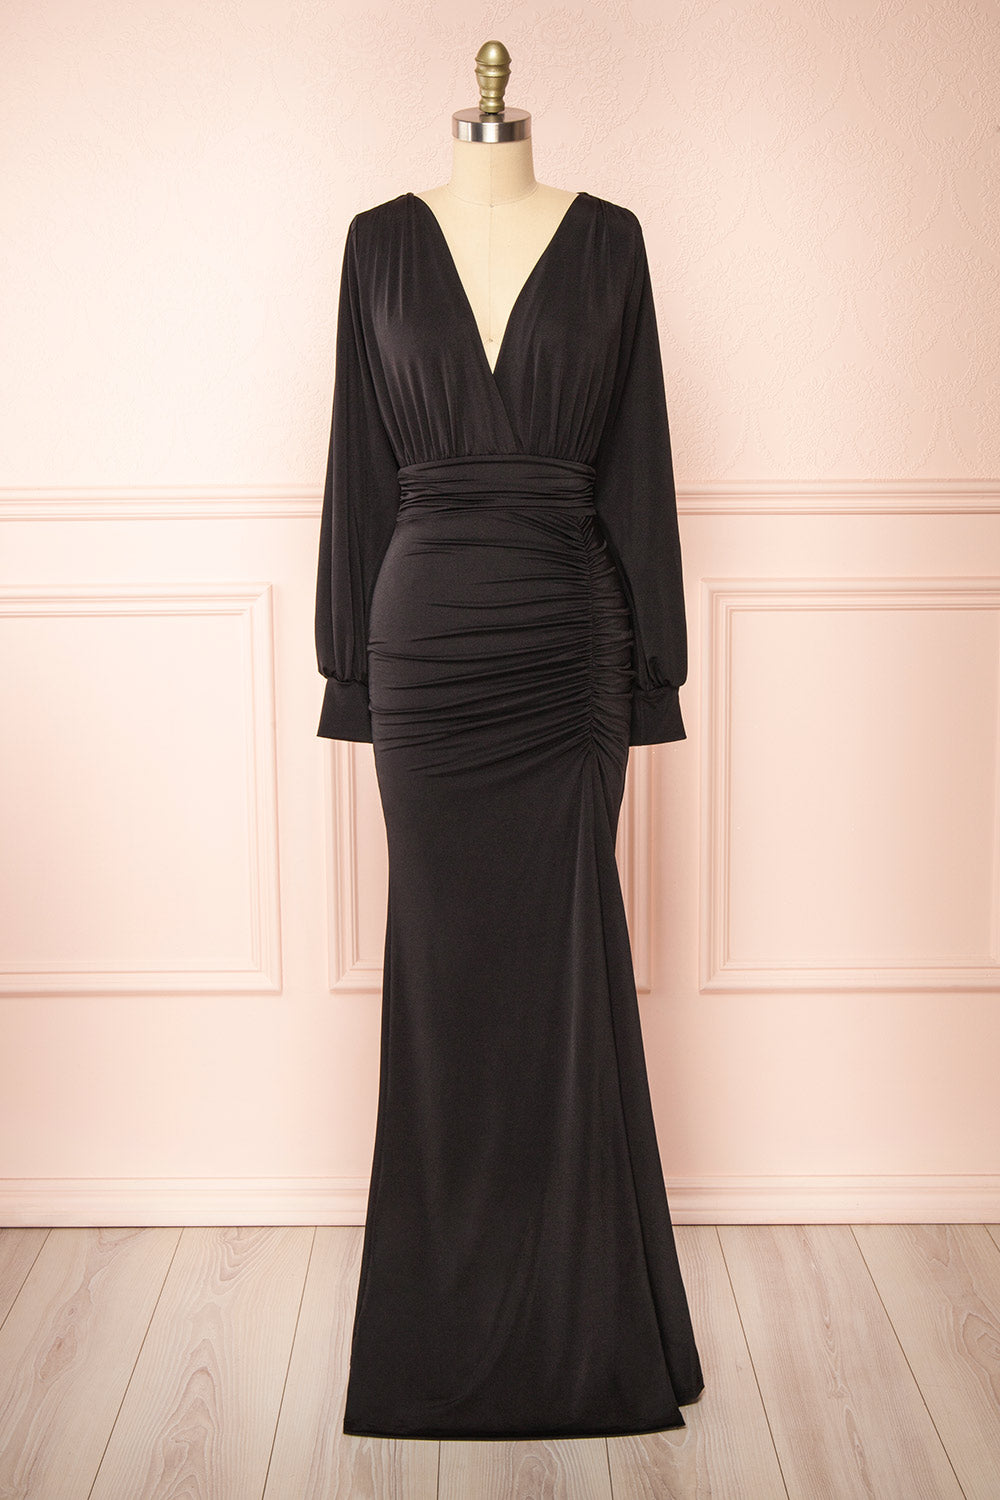 Cassidy Black Plunging Neckline Mermaid Maxi Dress | Boutique 1861 front view